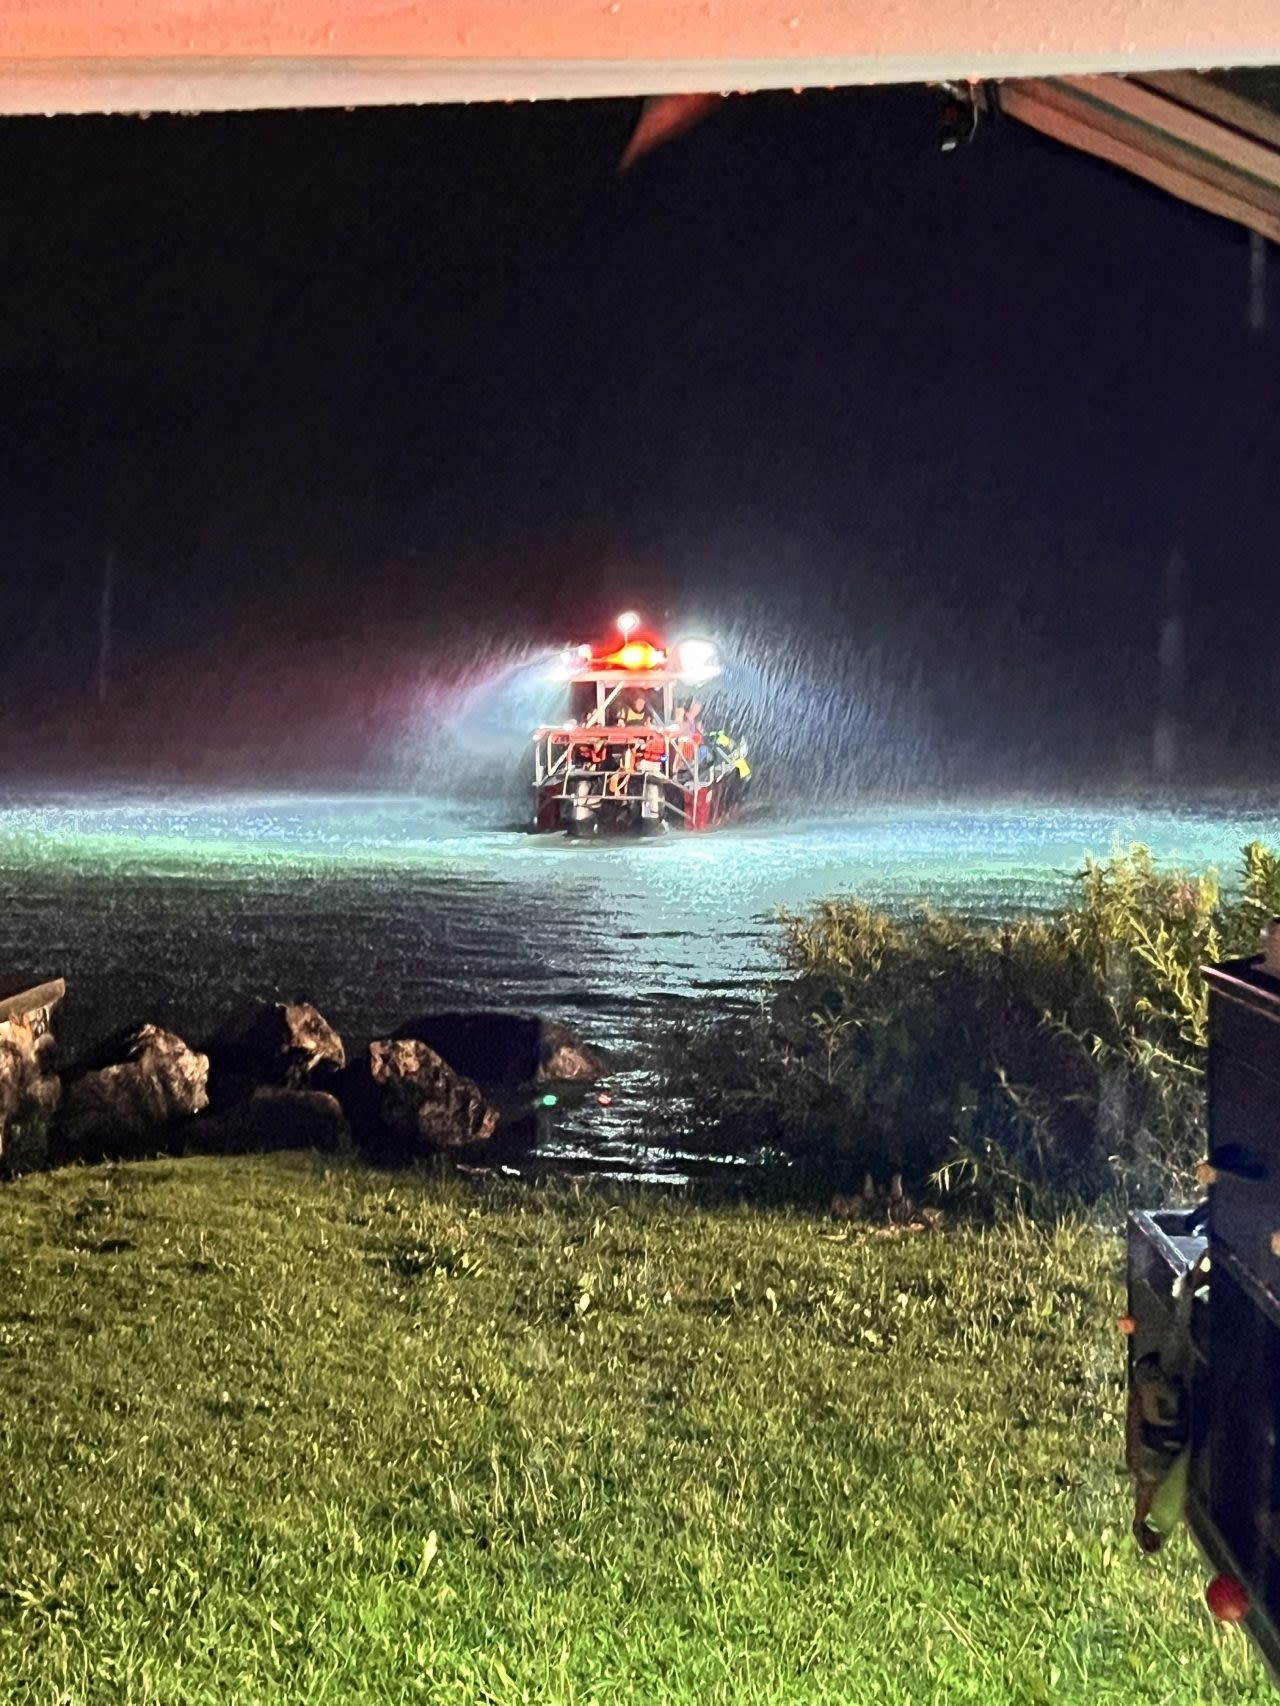 Crews search for 2 swimmers reported missing in Candlewood Lake